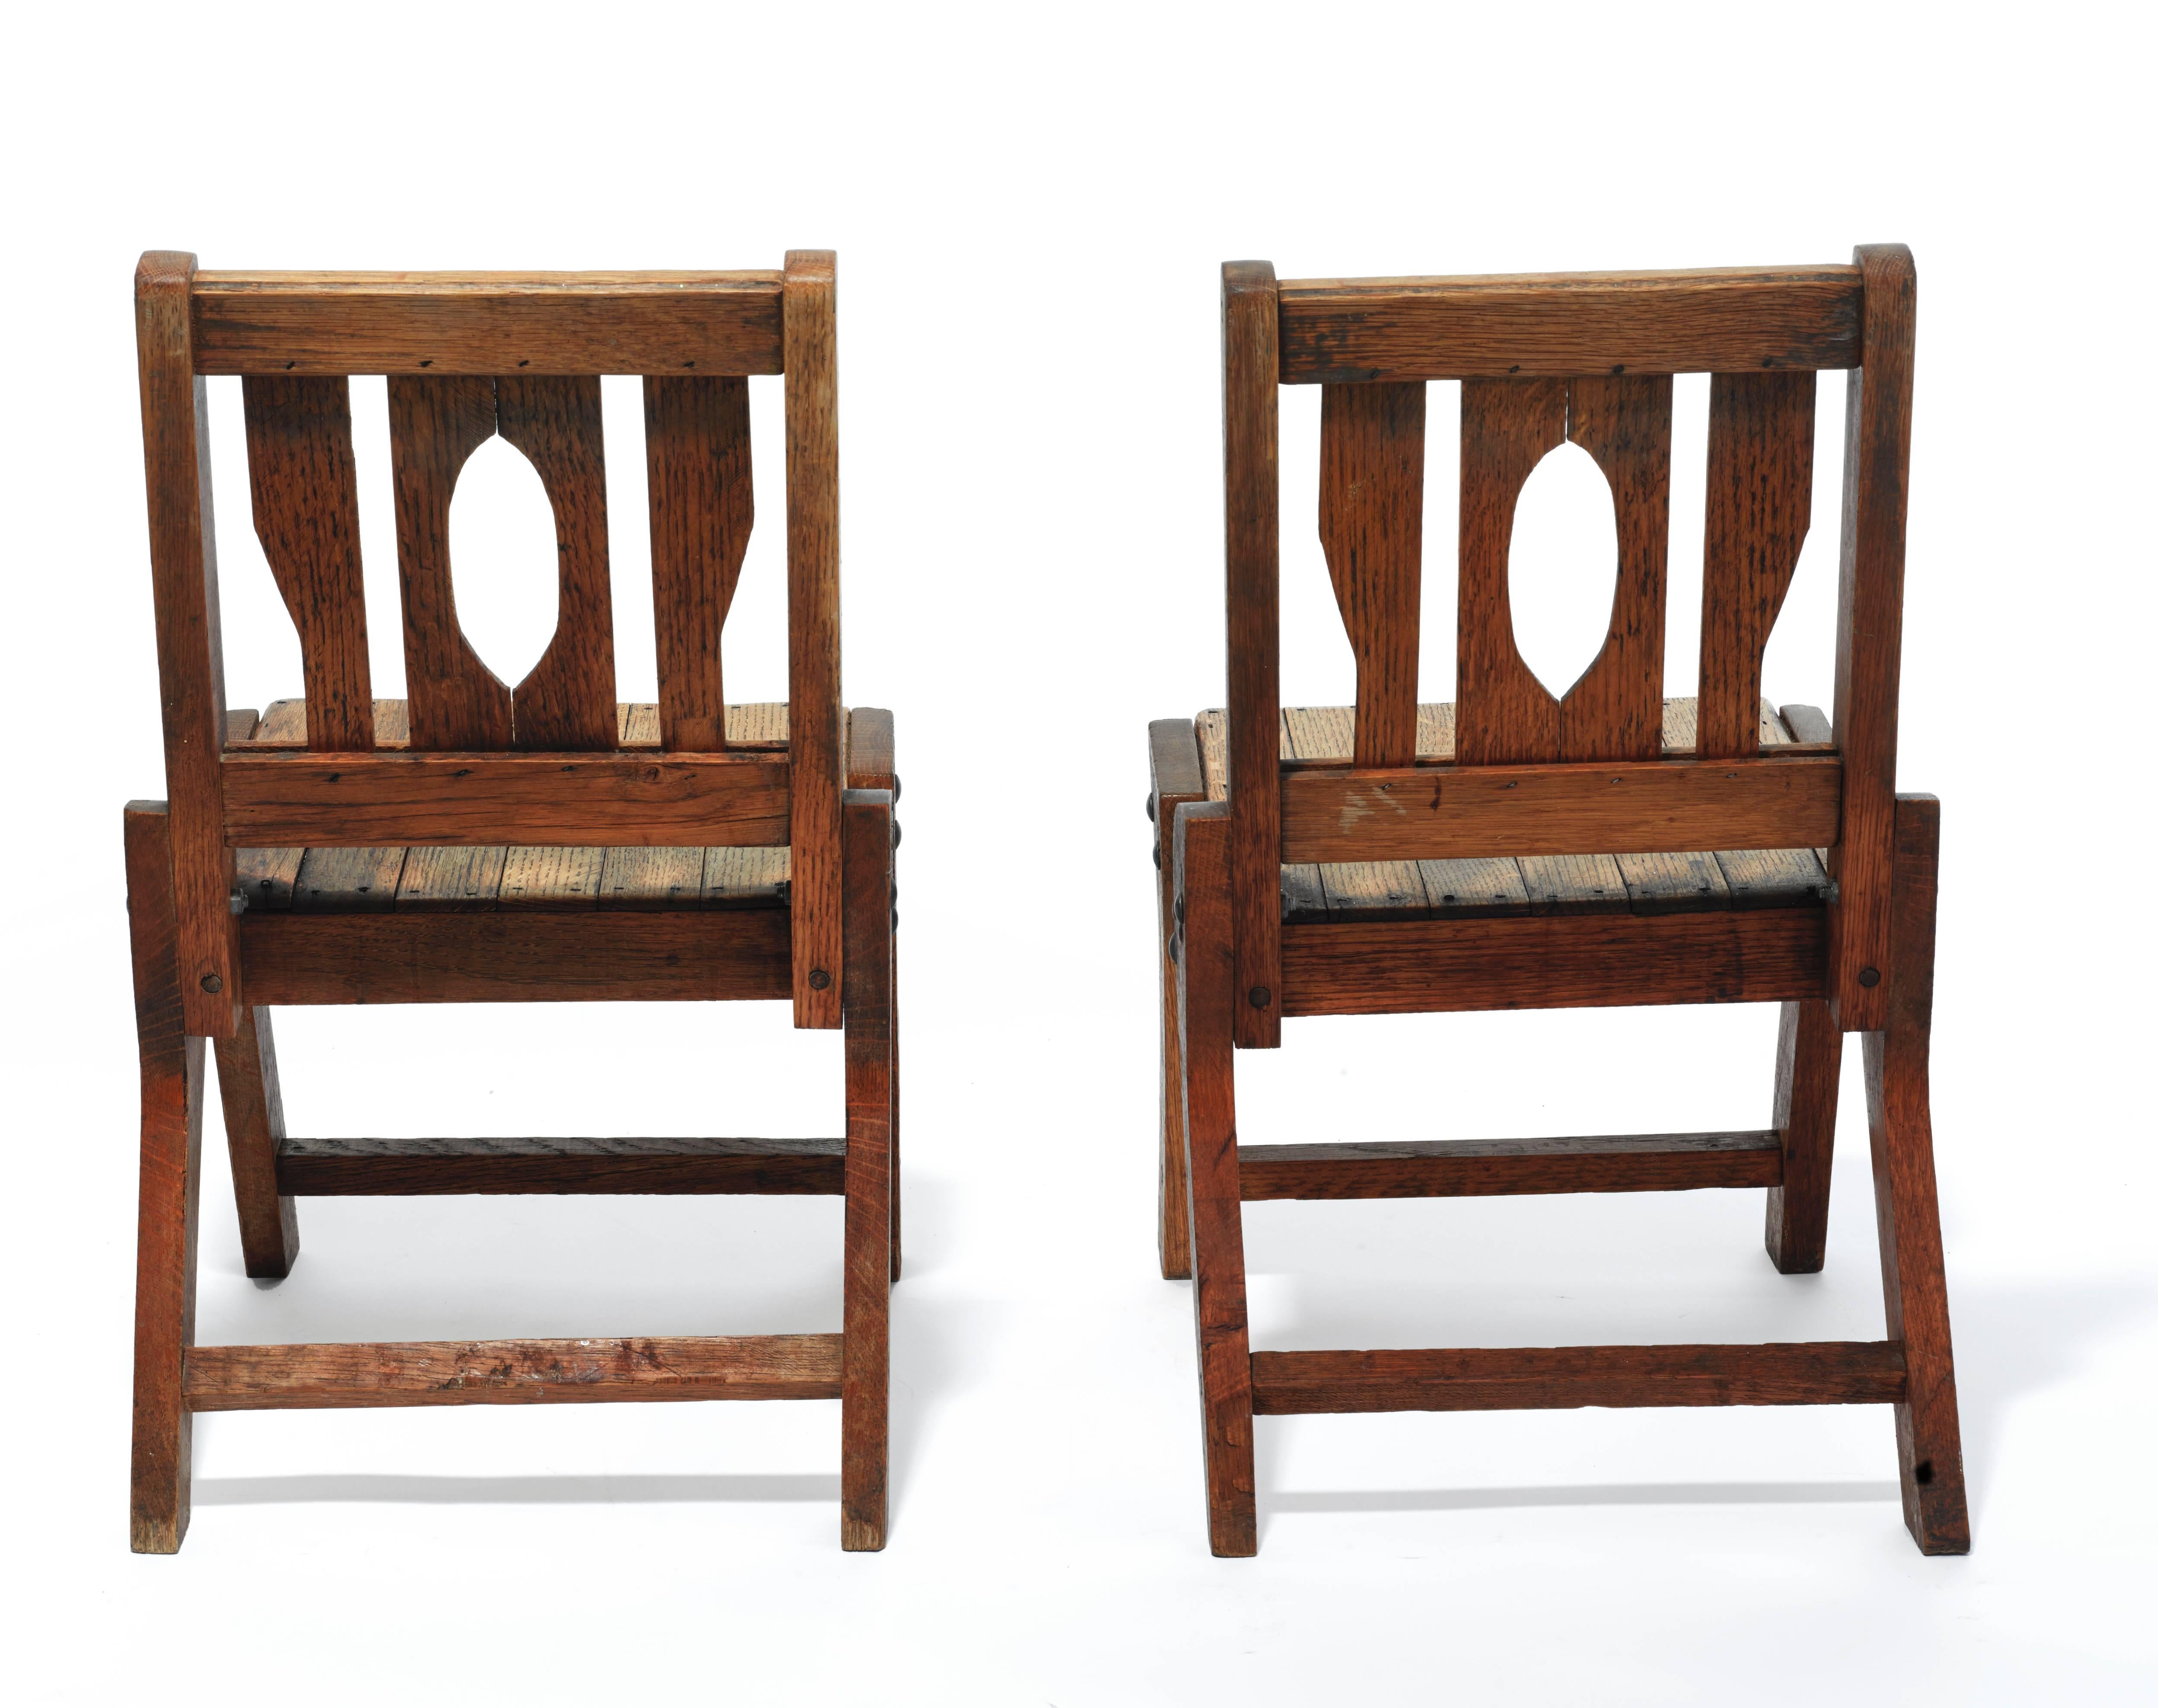 Pair of 1930s Wooden Colorado Chairs

USA, 1930s
Solid Wood
H 22.5 in, W 13.25, D 16 in (seat H 11.5 in)
Priced as pair